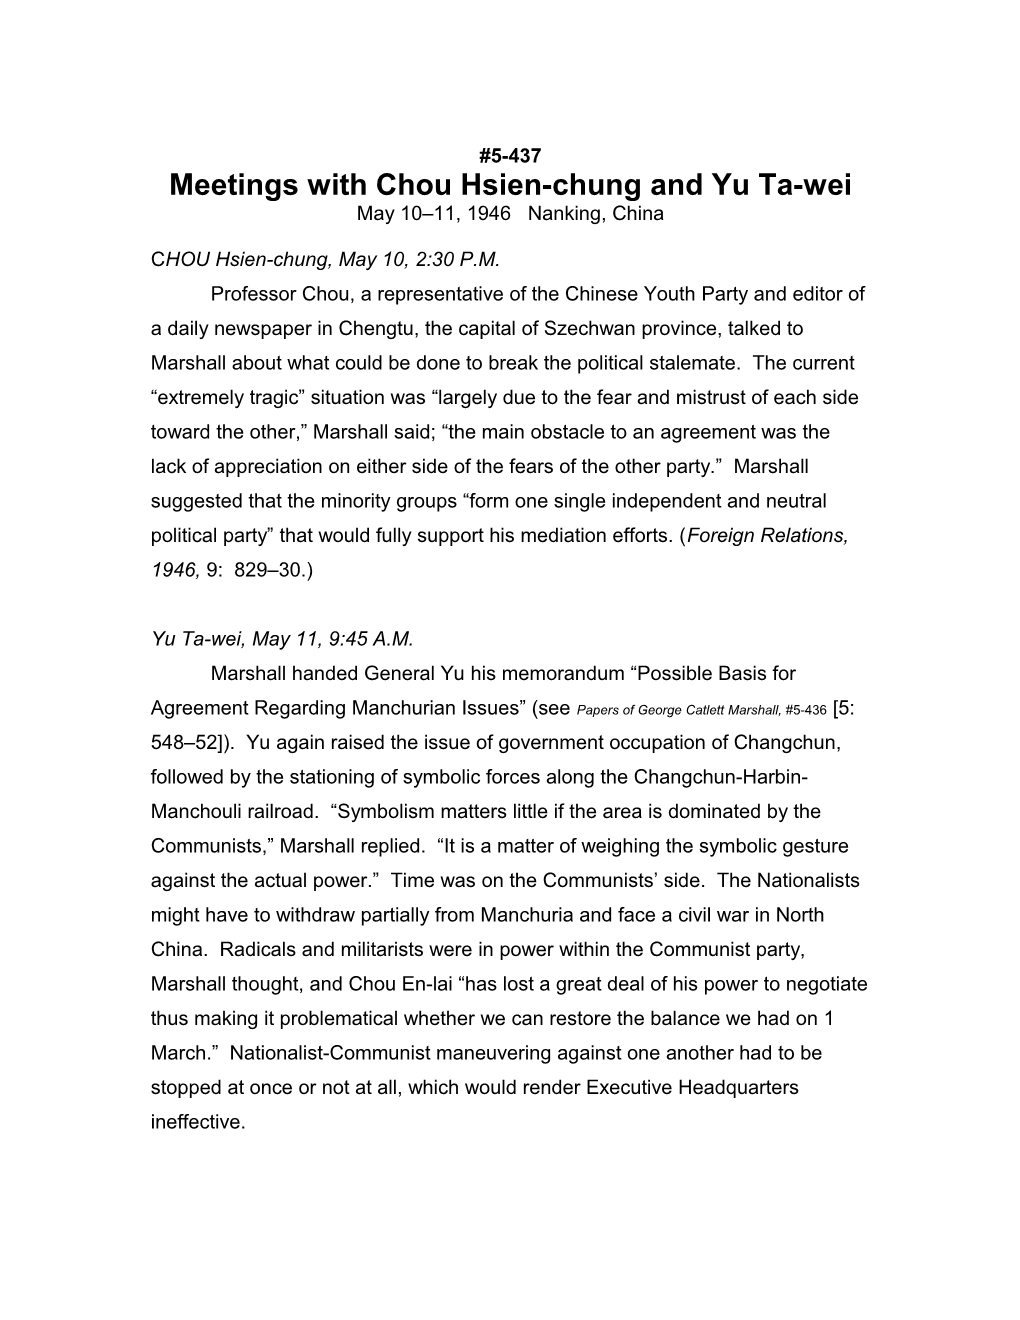 Meetings with Chou Hsien-Chung and Yu Ta-Wei